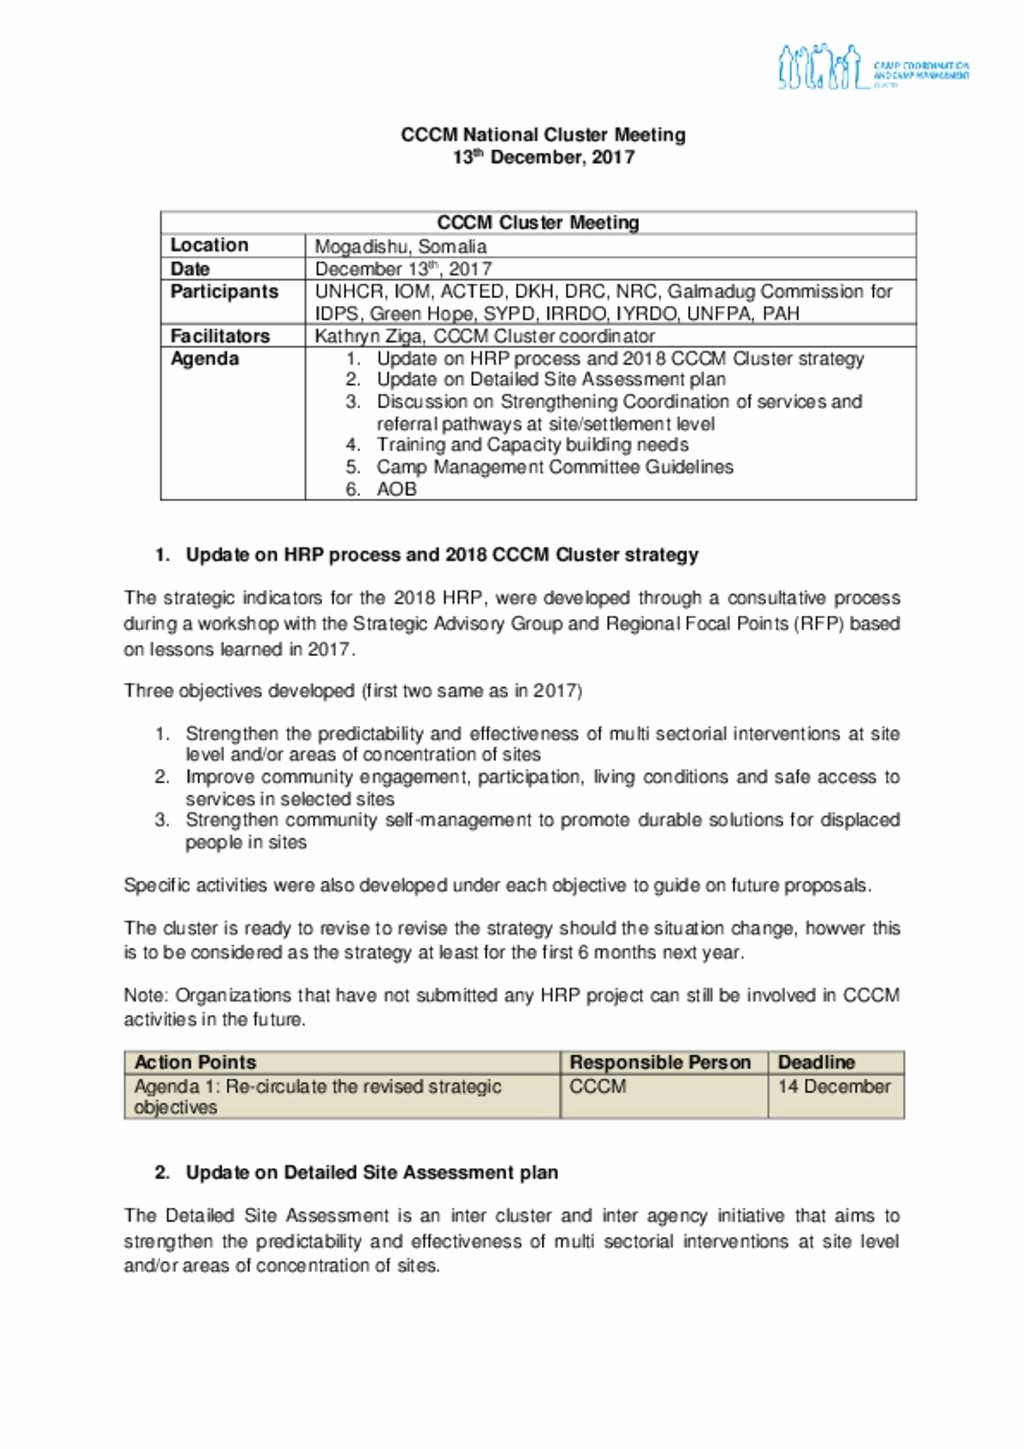 How to Document Meeting Minutes New Document Cccm Cluster Meeting Minutes 13 December 2017